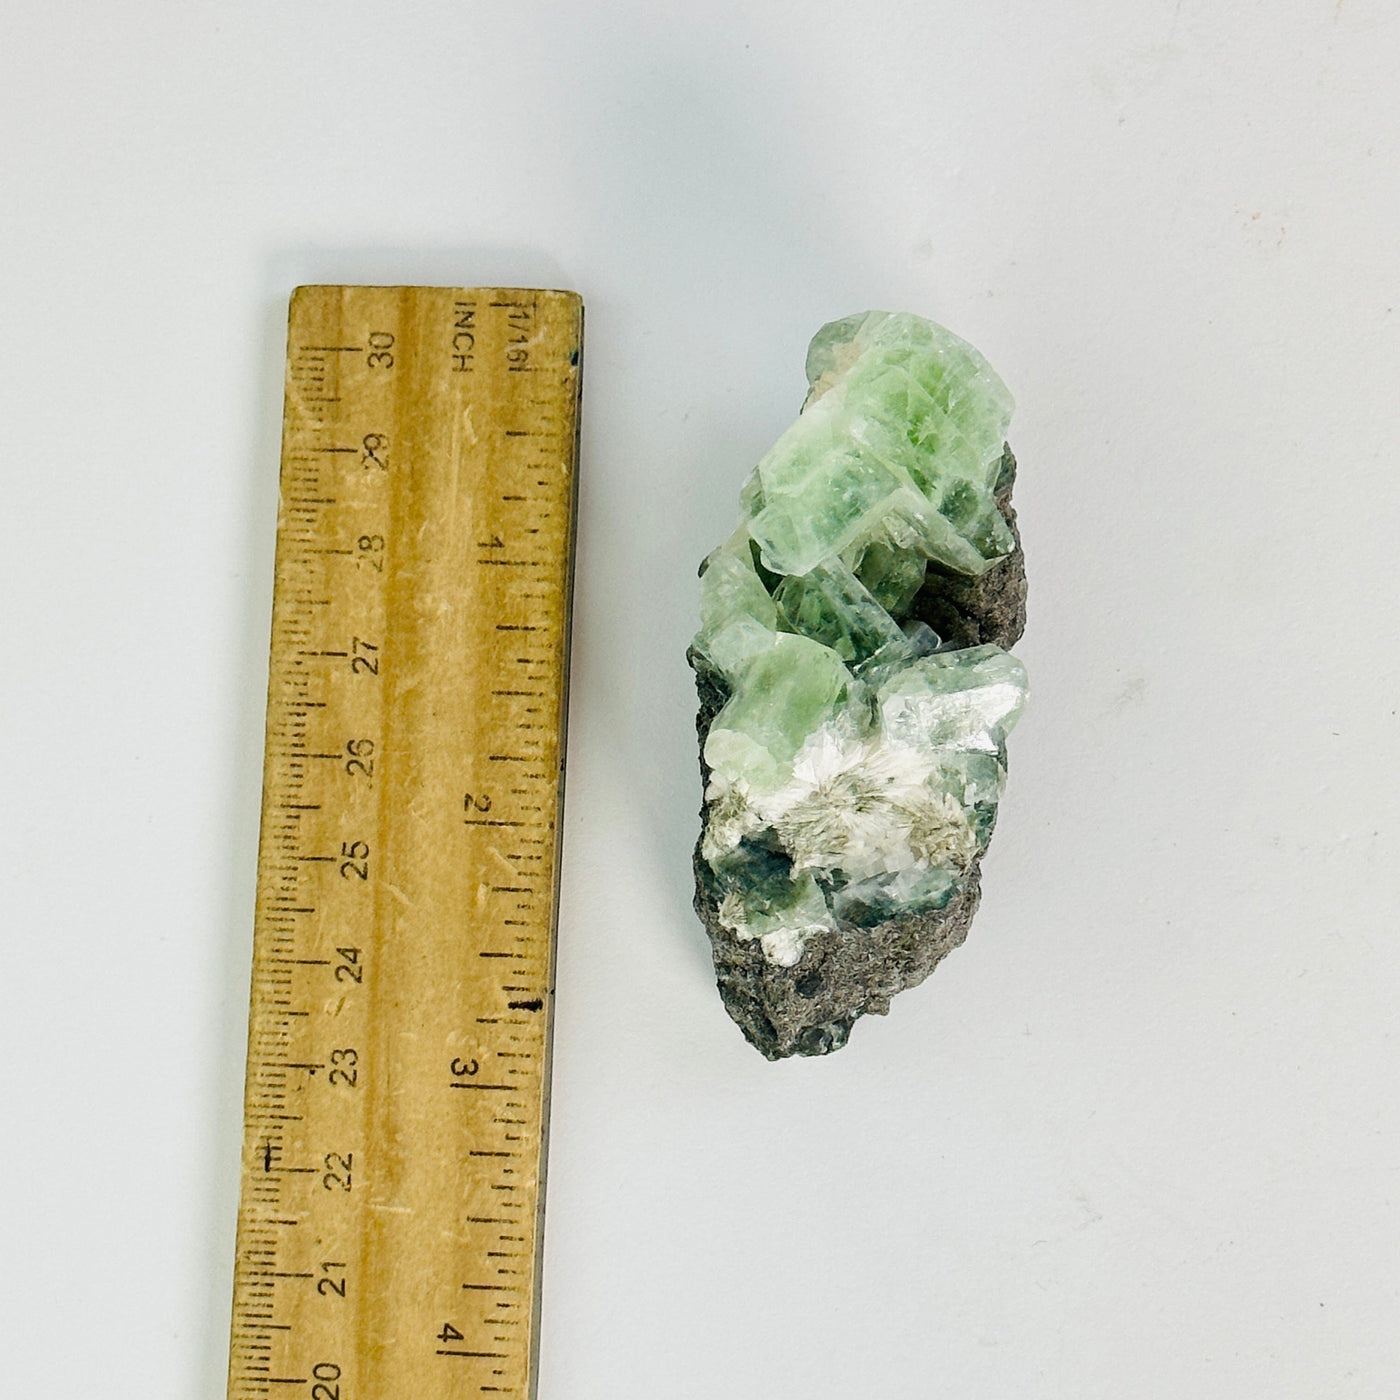 green apophyllite on matrix cluster next to a ruler for size reference